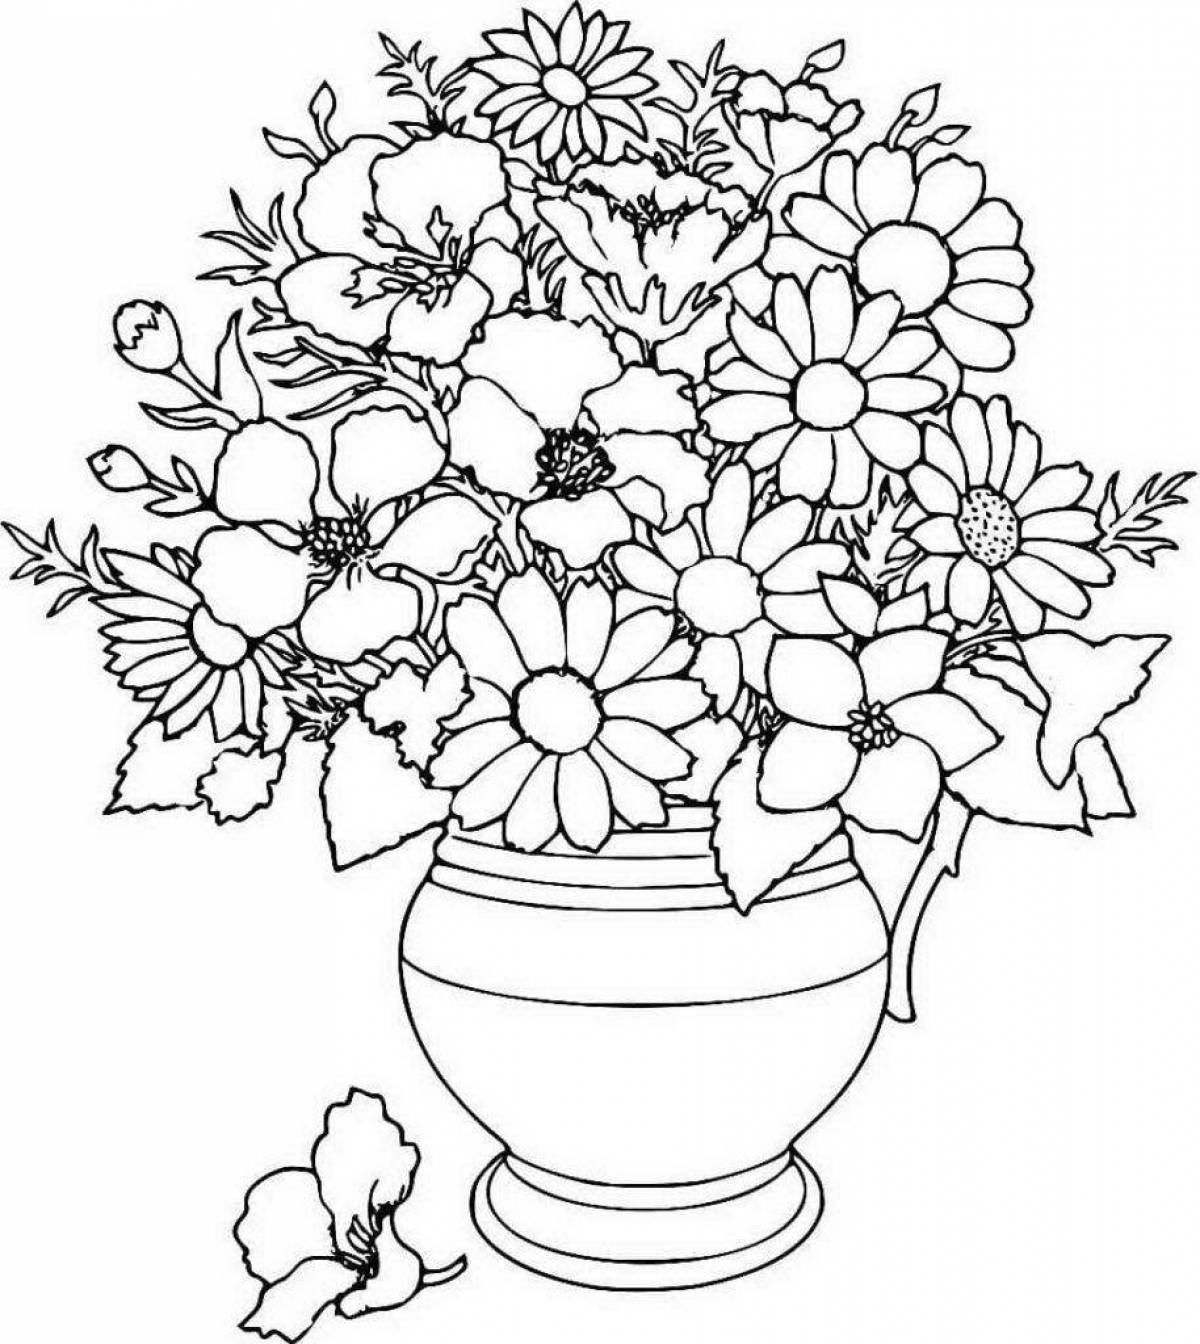 Colorful vase of flowers coloring book